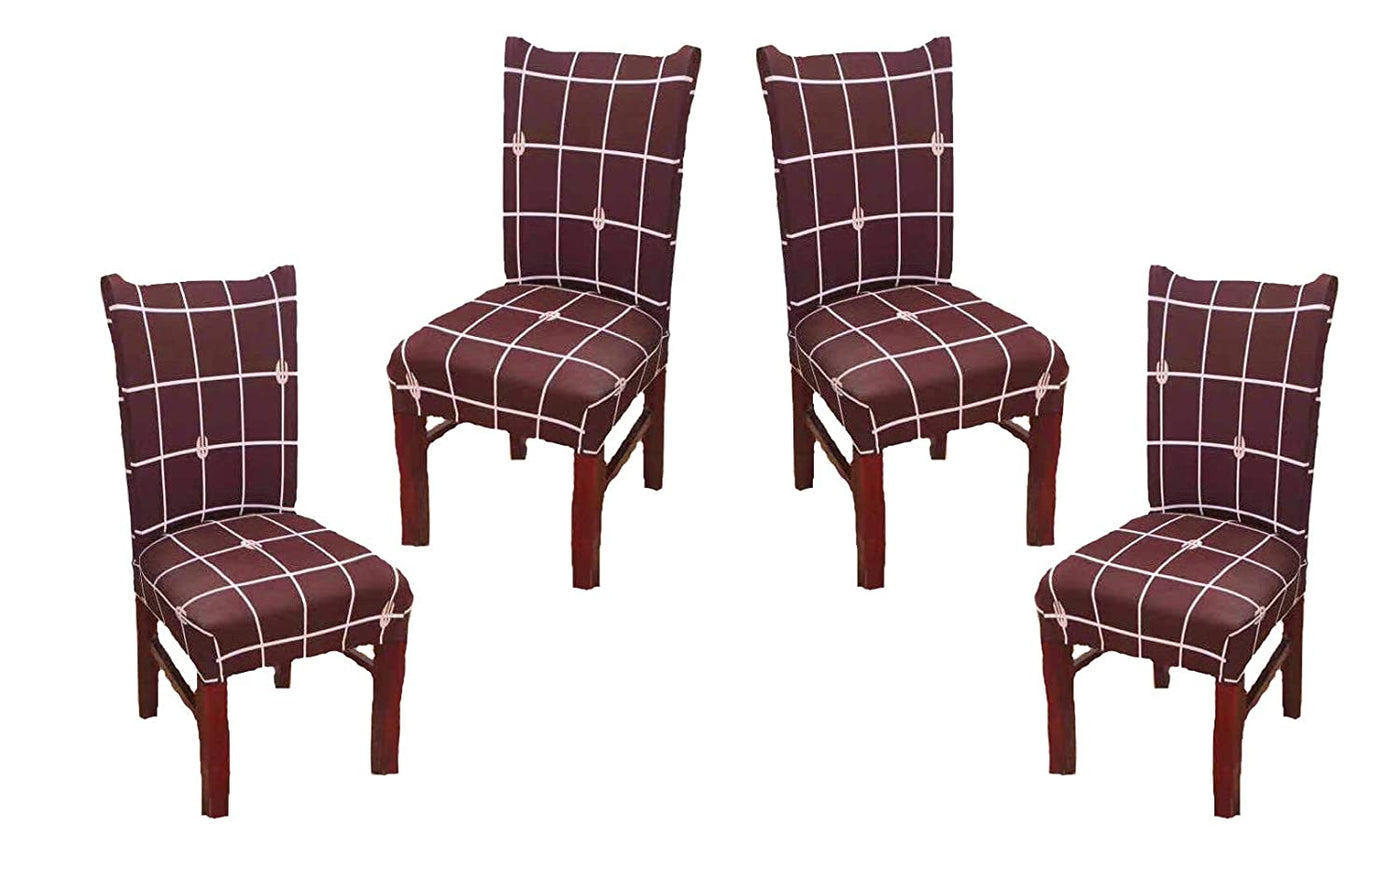 Printed Elastic Chair Cover - Brown Check